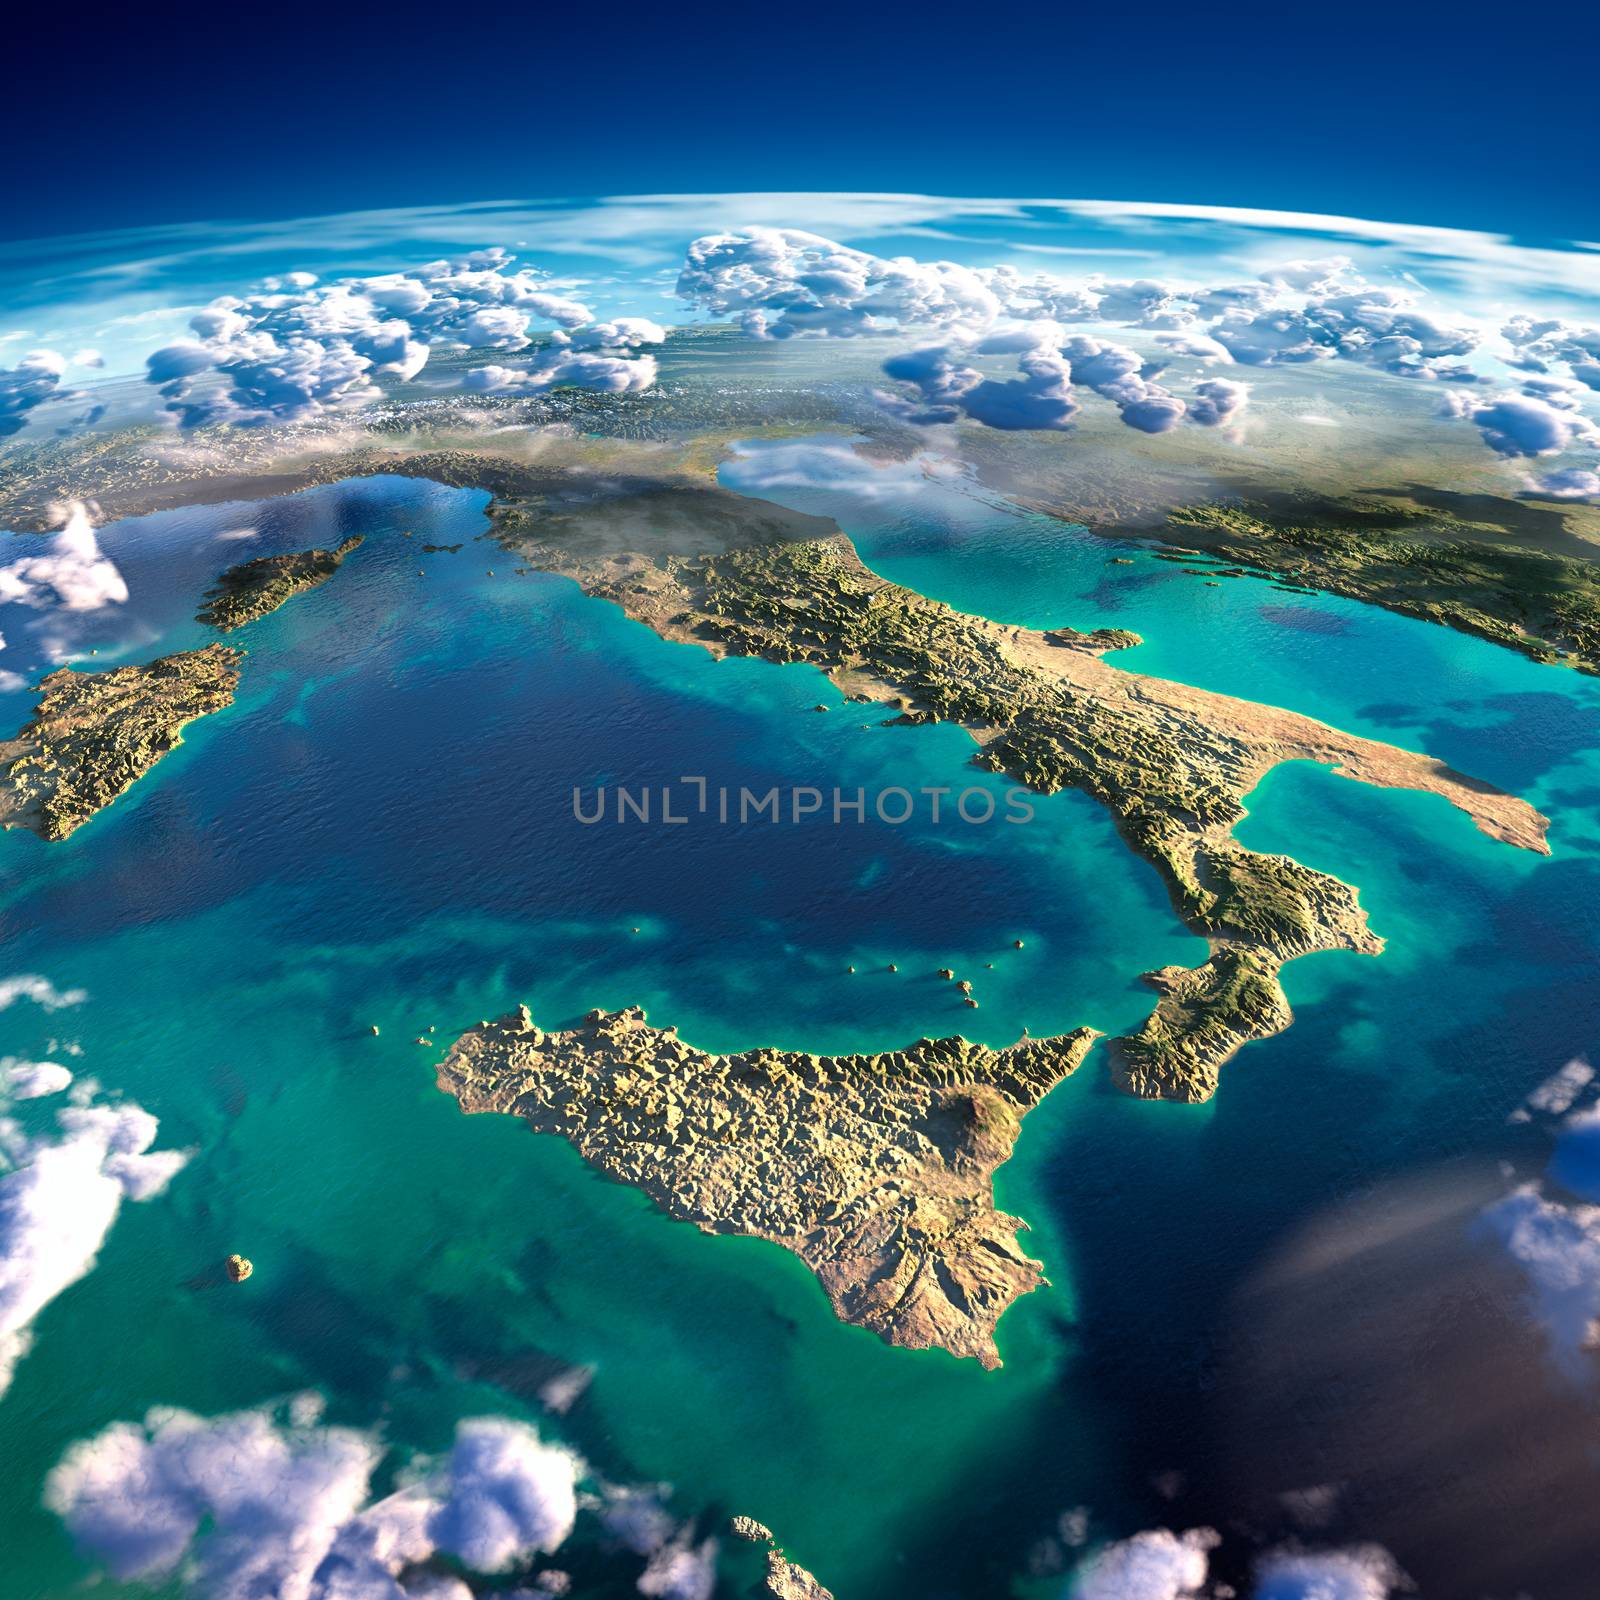 Fragments of the planet Earth. Italy and the Mediterranean Sea by Antartis